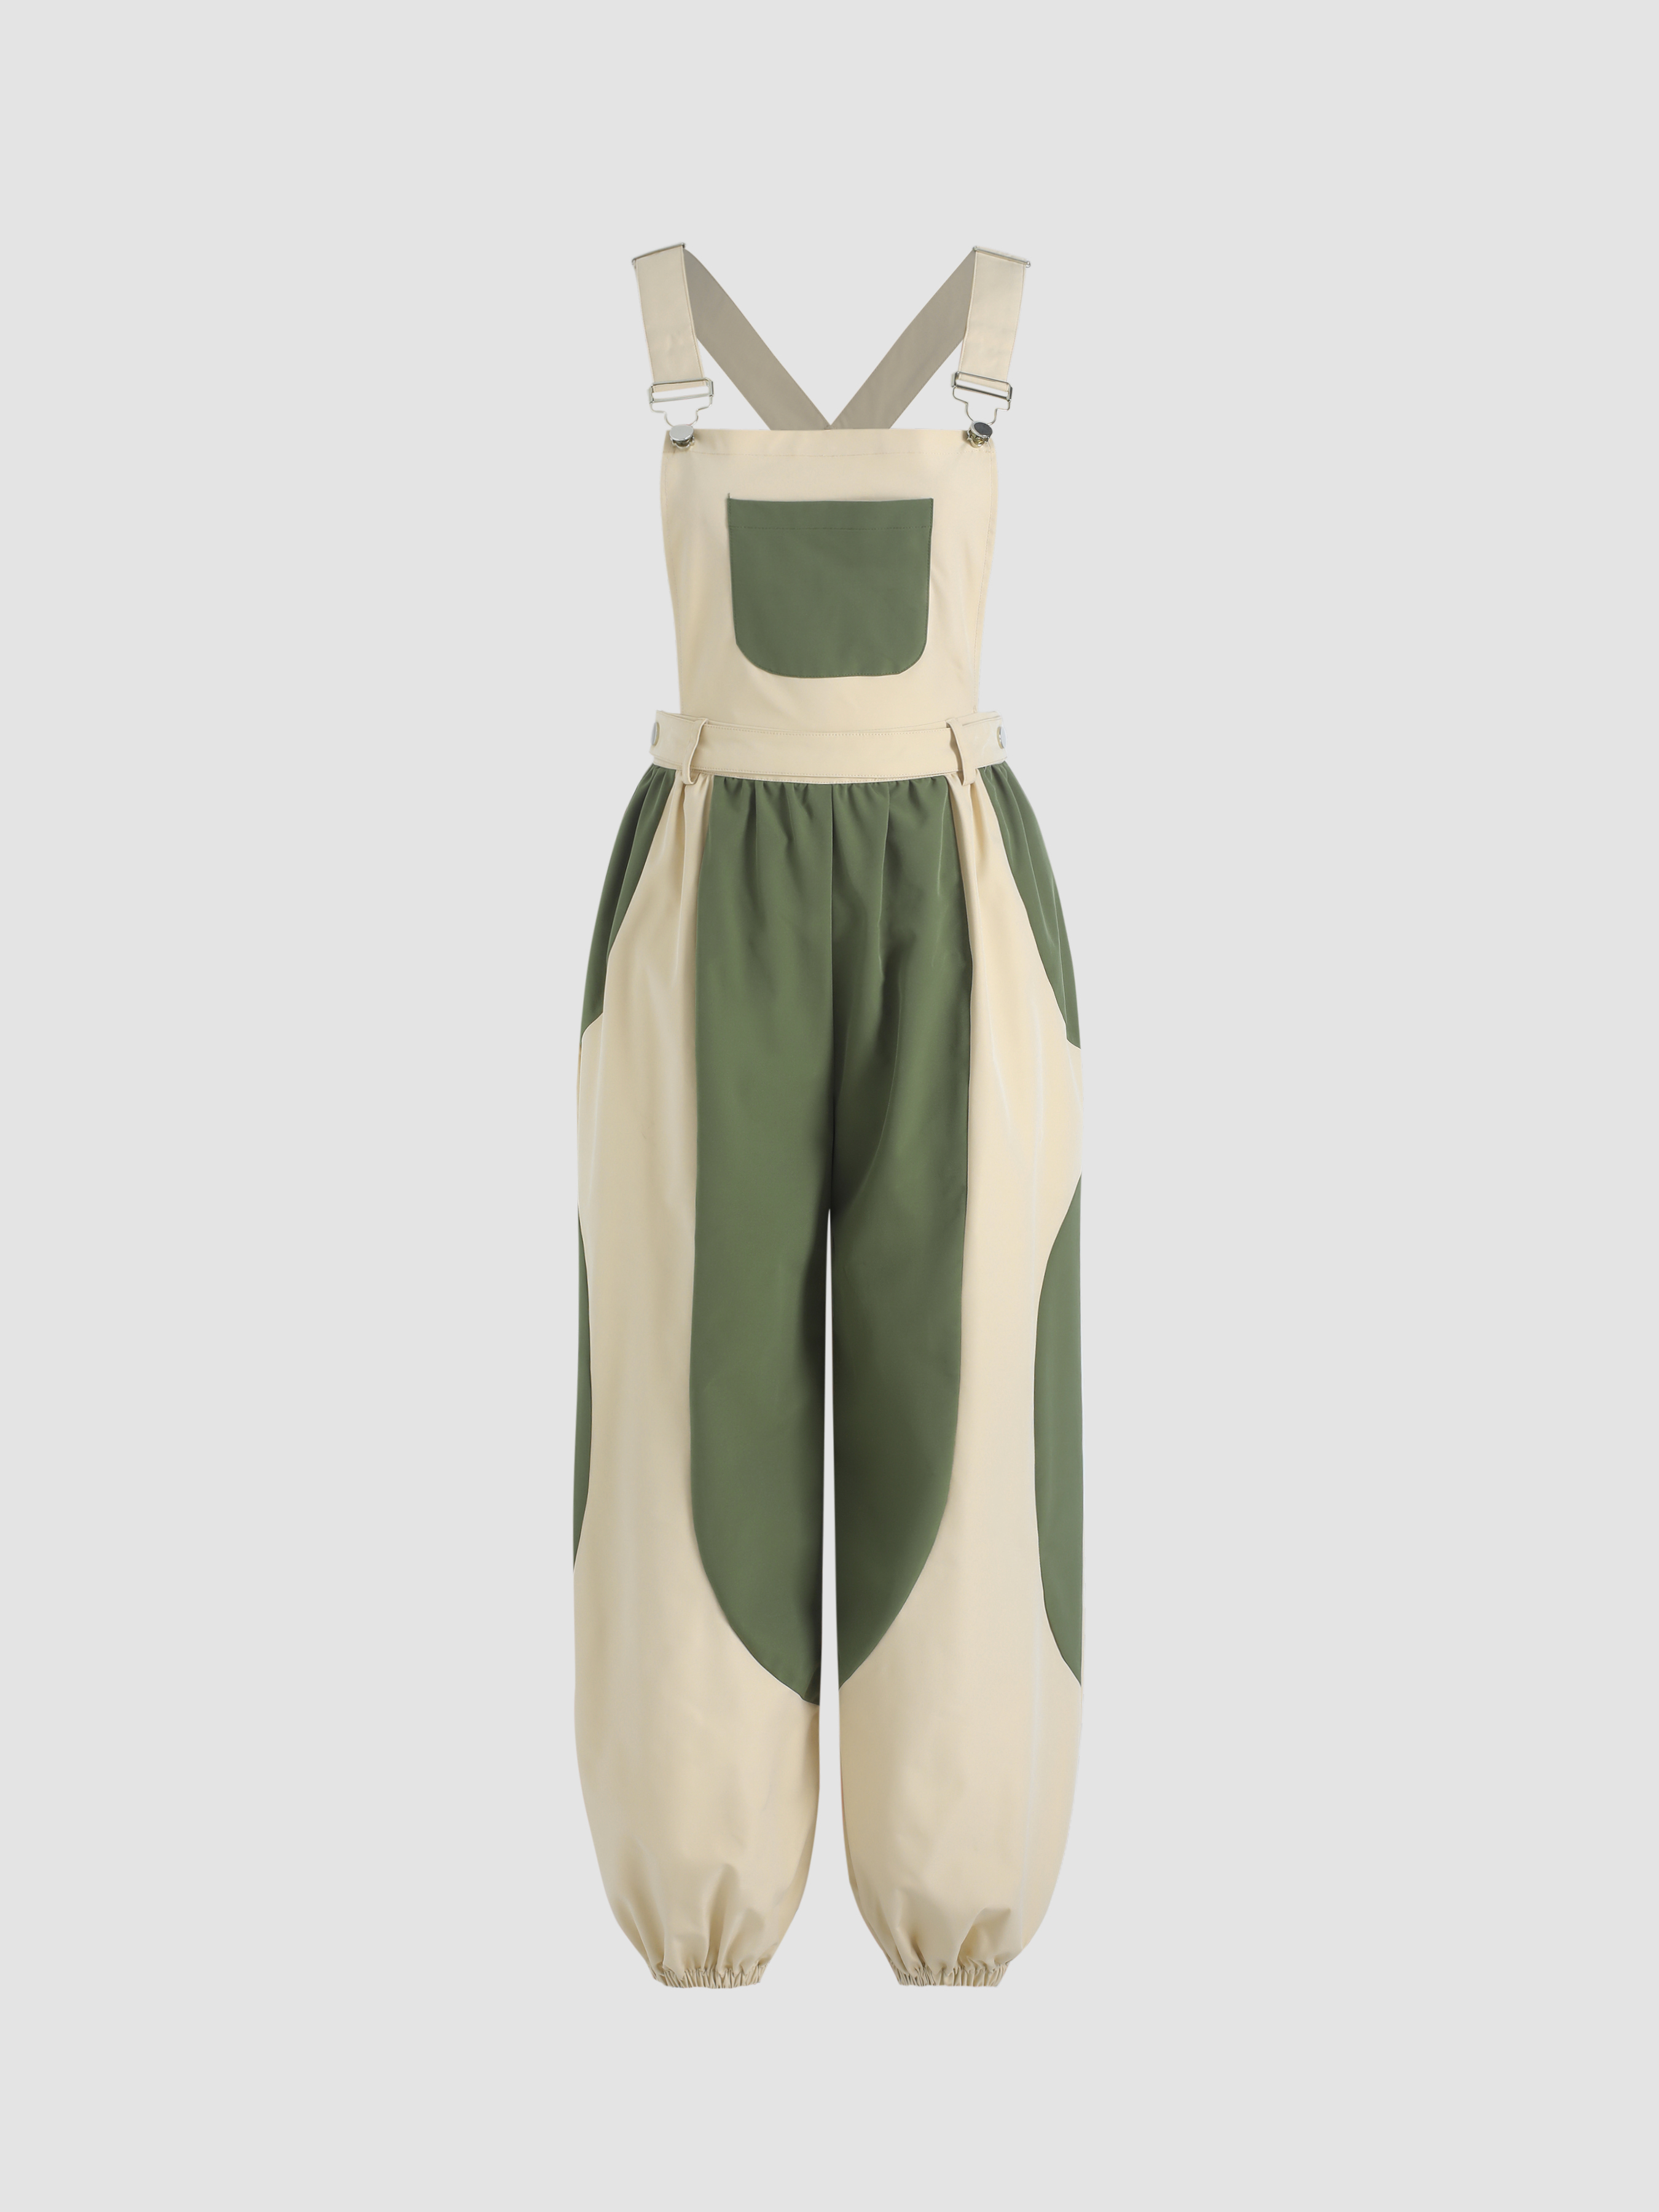 Patchy Buckle Up Jogger Jumpsuit For School